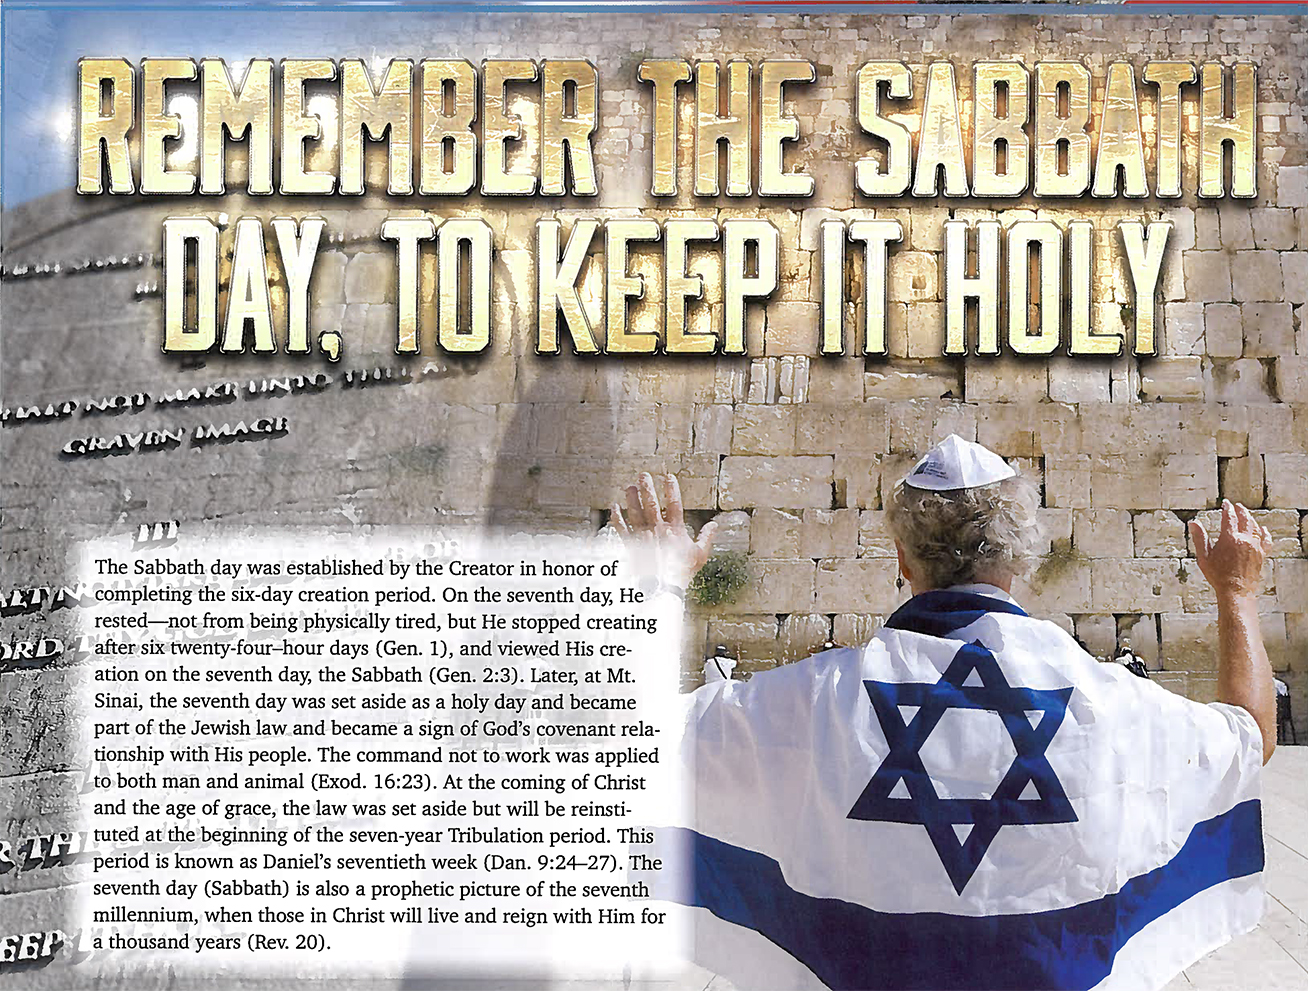 2018 Prophecy Calendar: April - Remember the Sabbath Day, To Keep it Holy